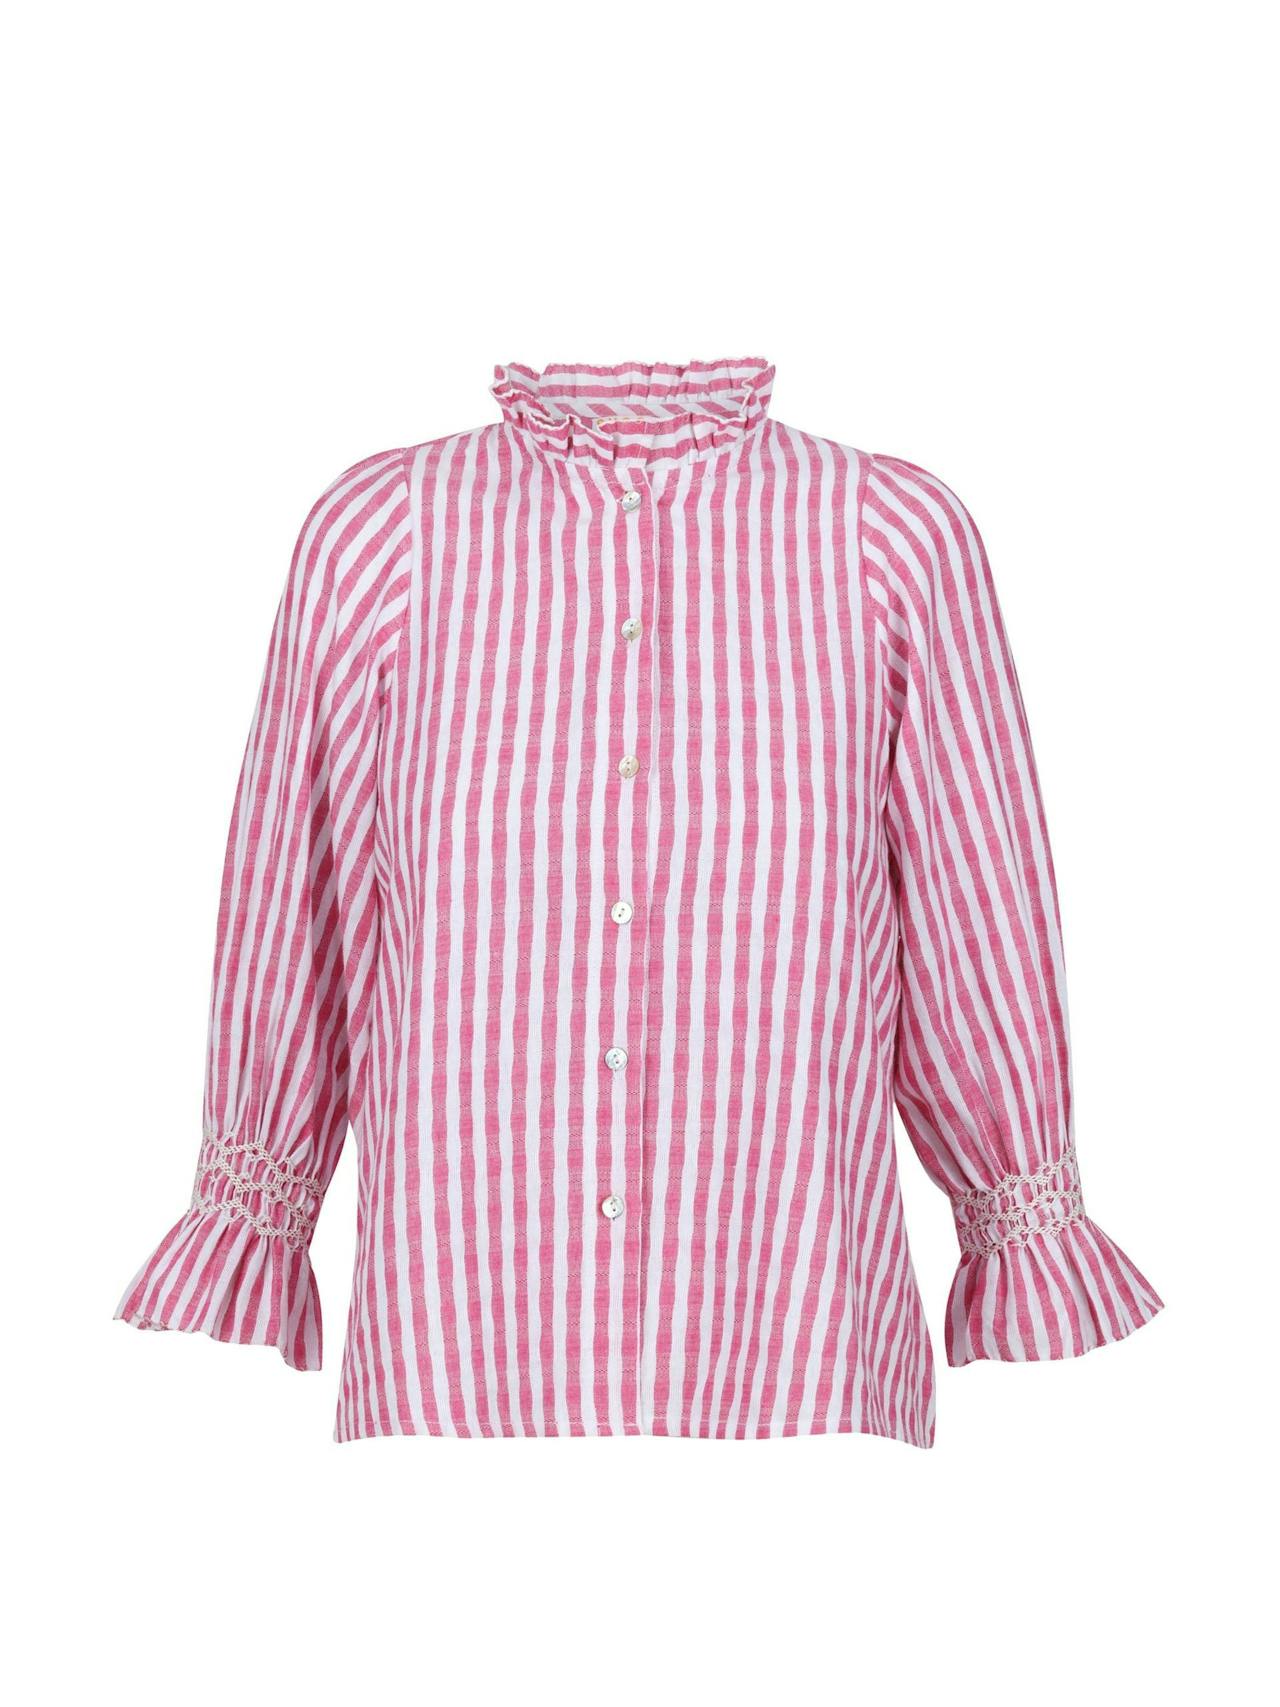 Shelley blouse painted pink stripes with icecap hand smocking edition 1